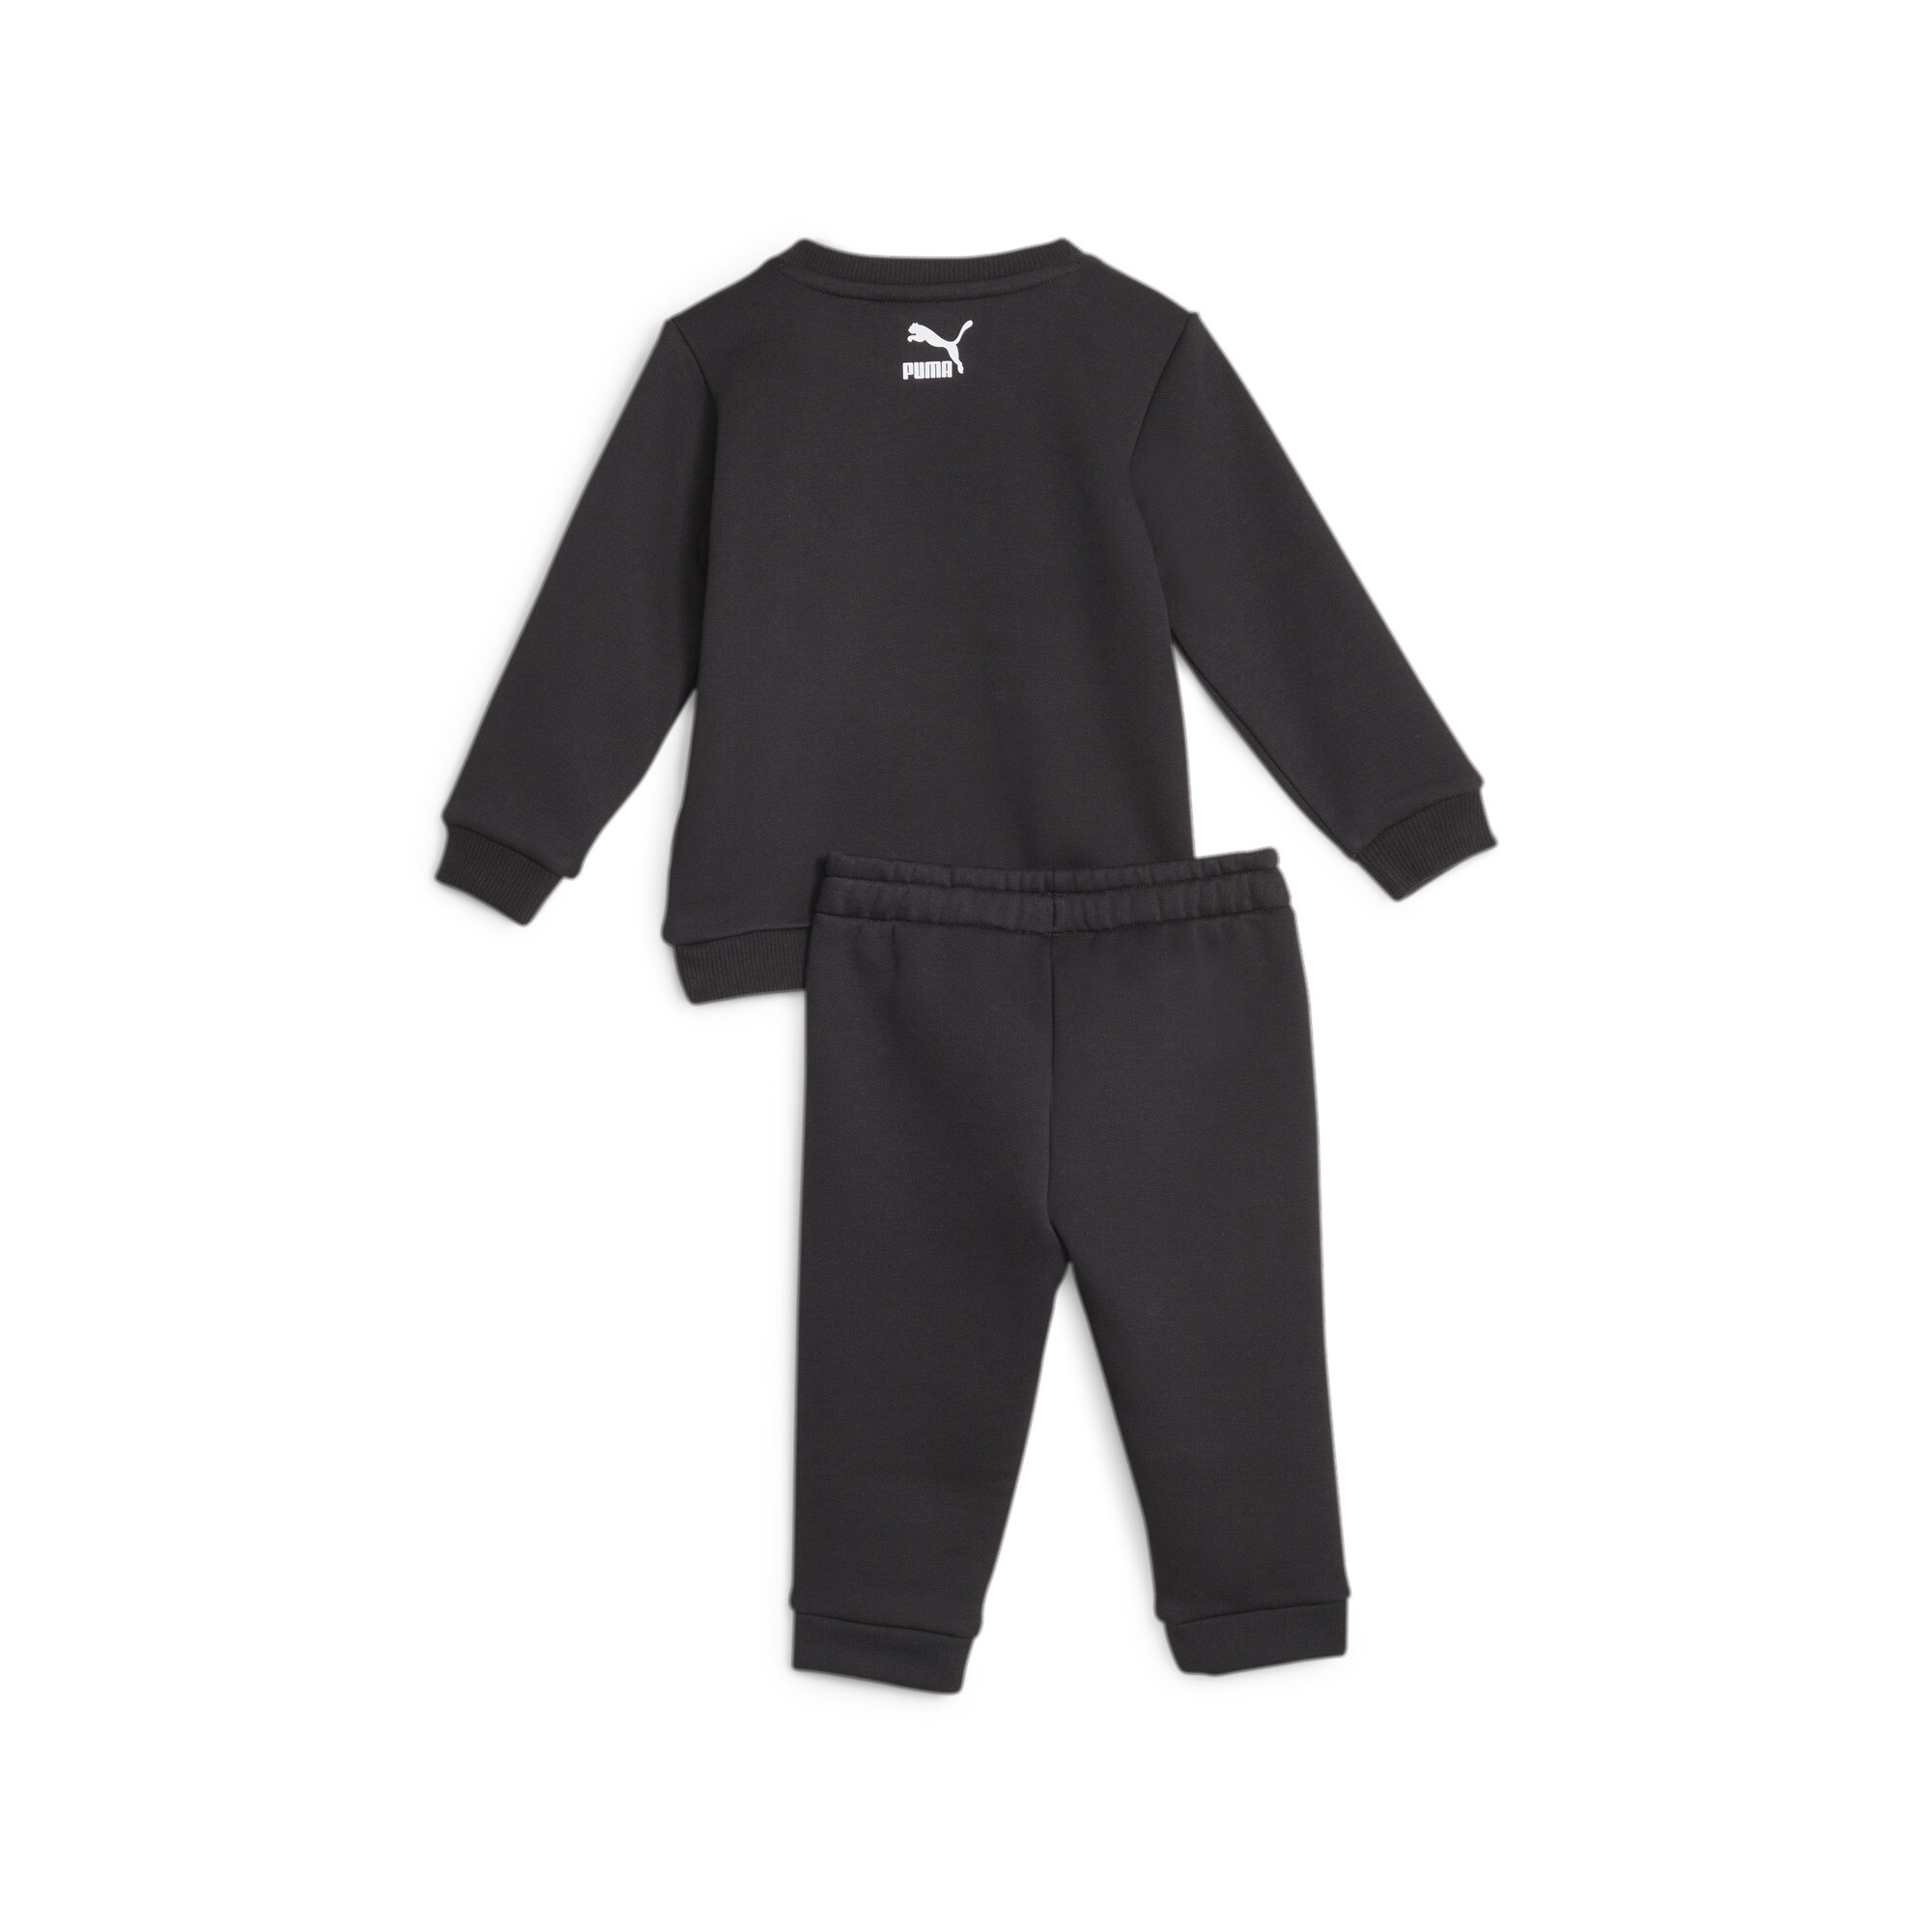 PUMA X MIRACULOUS Toddlers' Jogger In Black, Size 1-2 Youth